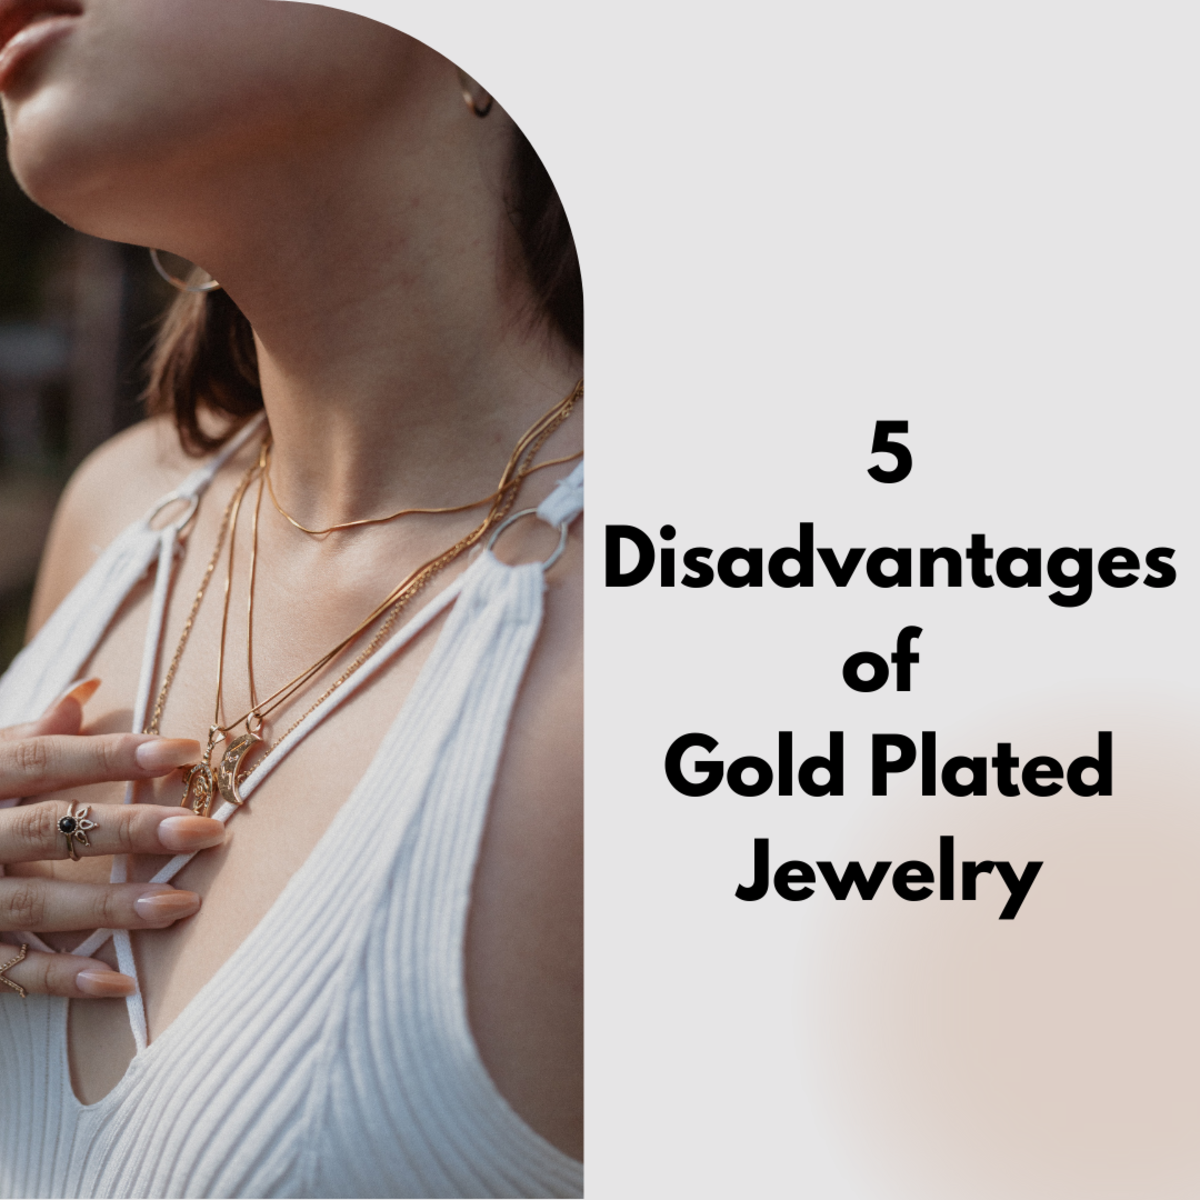 The Five Disadvantages of Gold Plated Jewelry